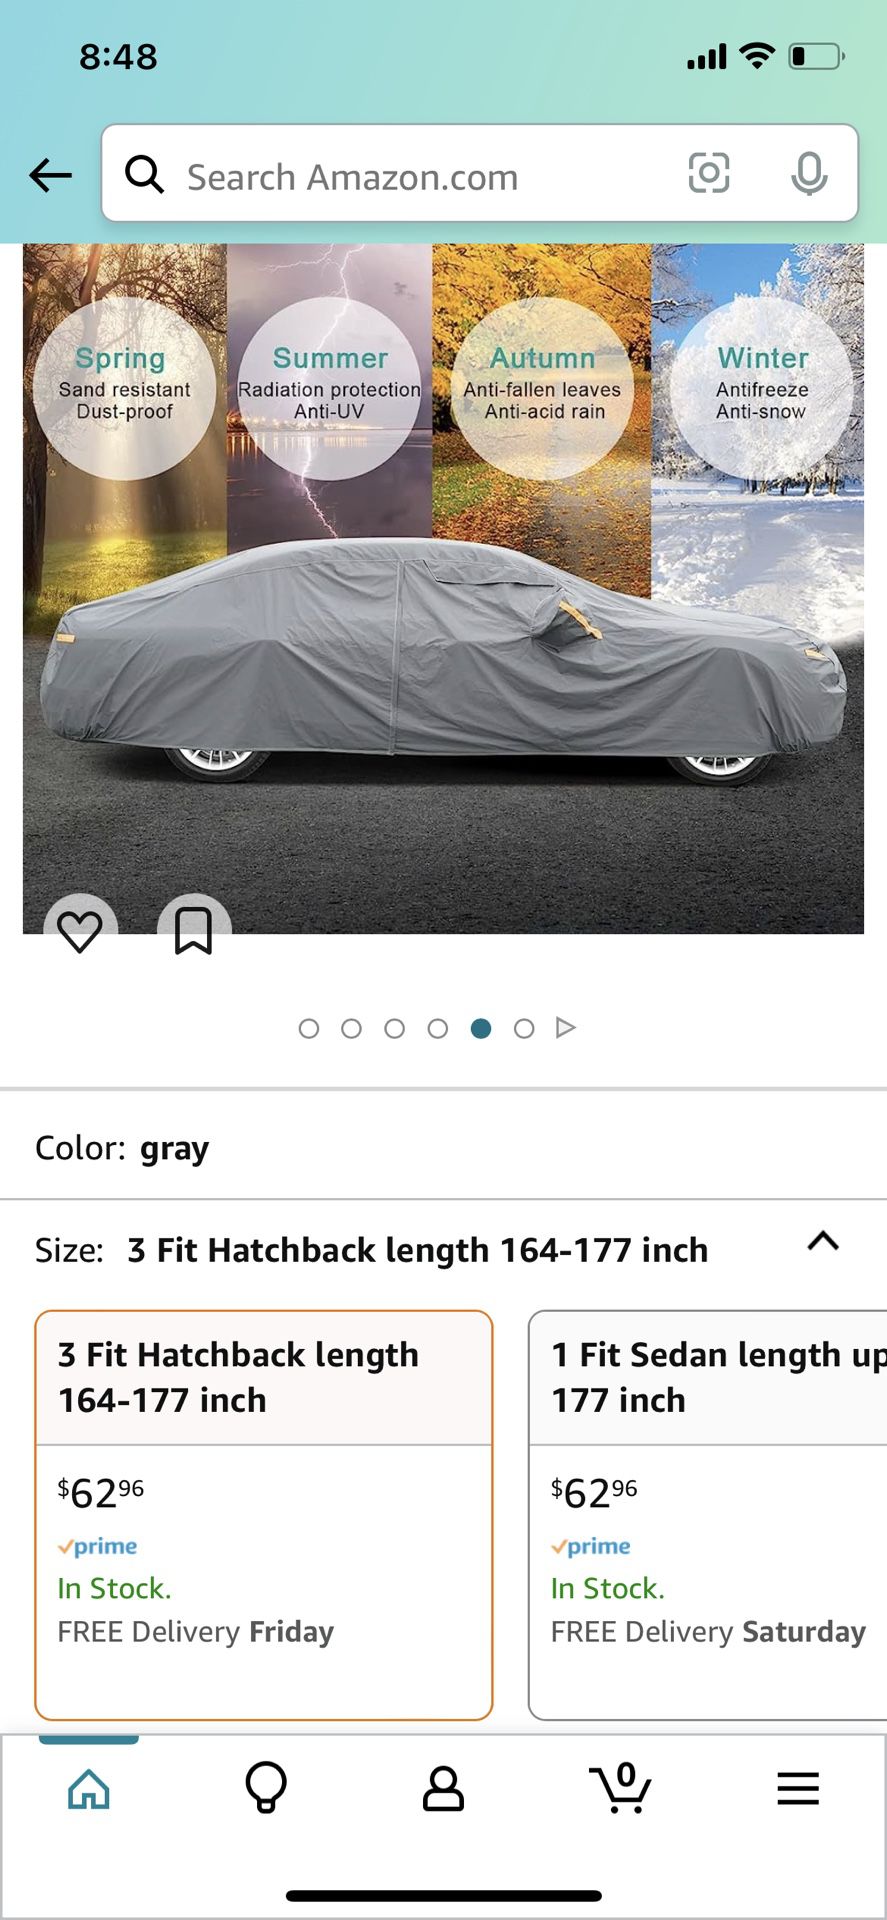 New & Unpacked Hatchback Car Cover All Weather with Zipper / Honda civic / Ford fiesta…(Amazon: $63)